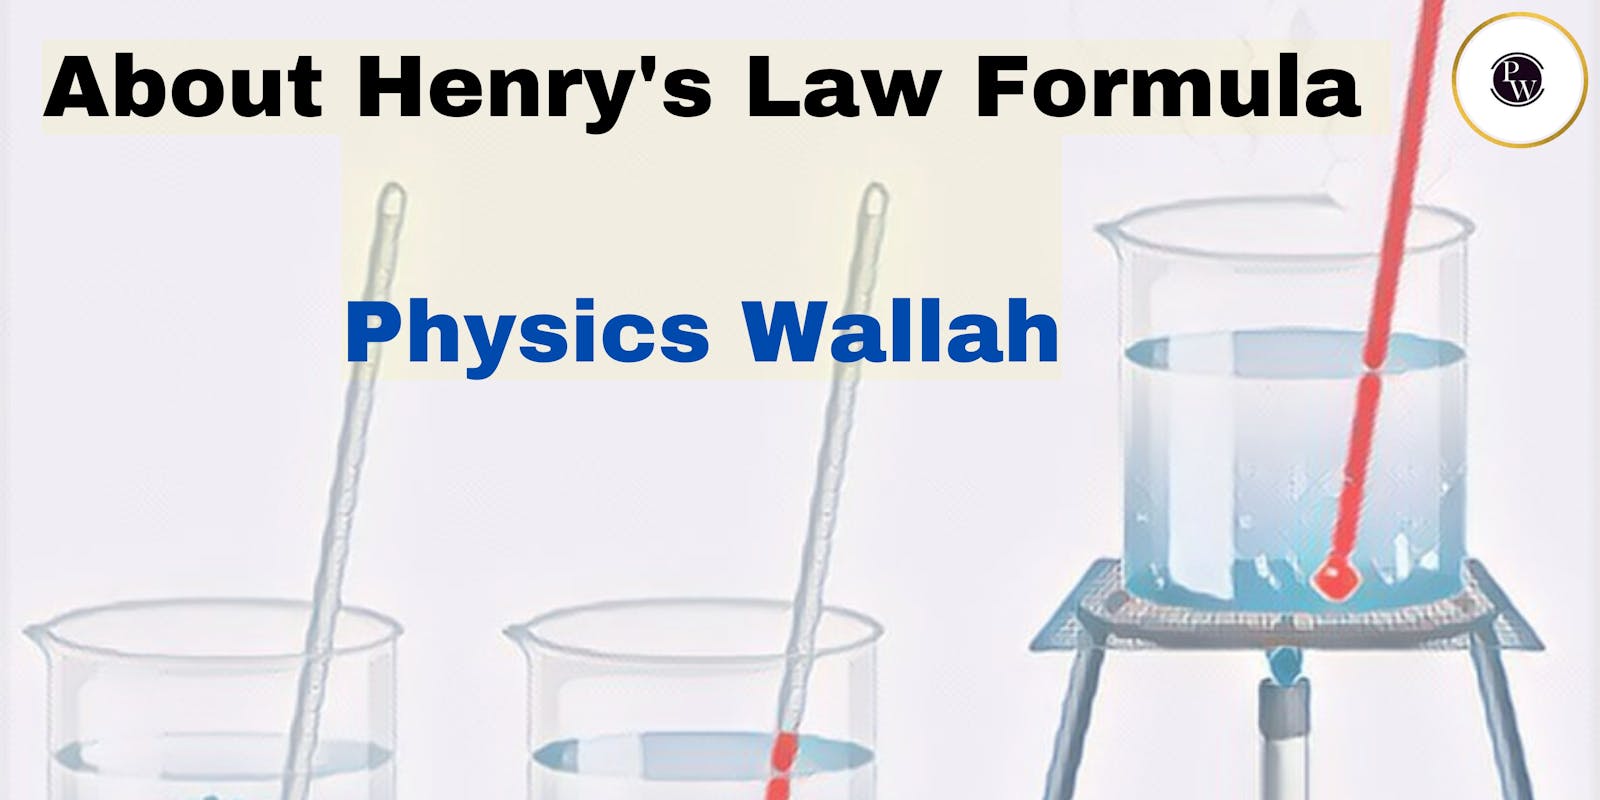 About Henry's Law Formula - Physics Wallah